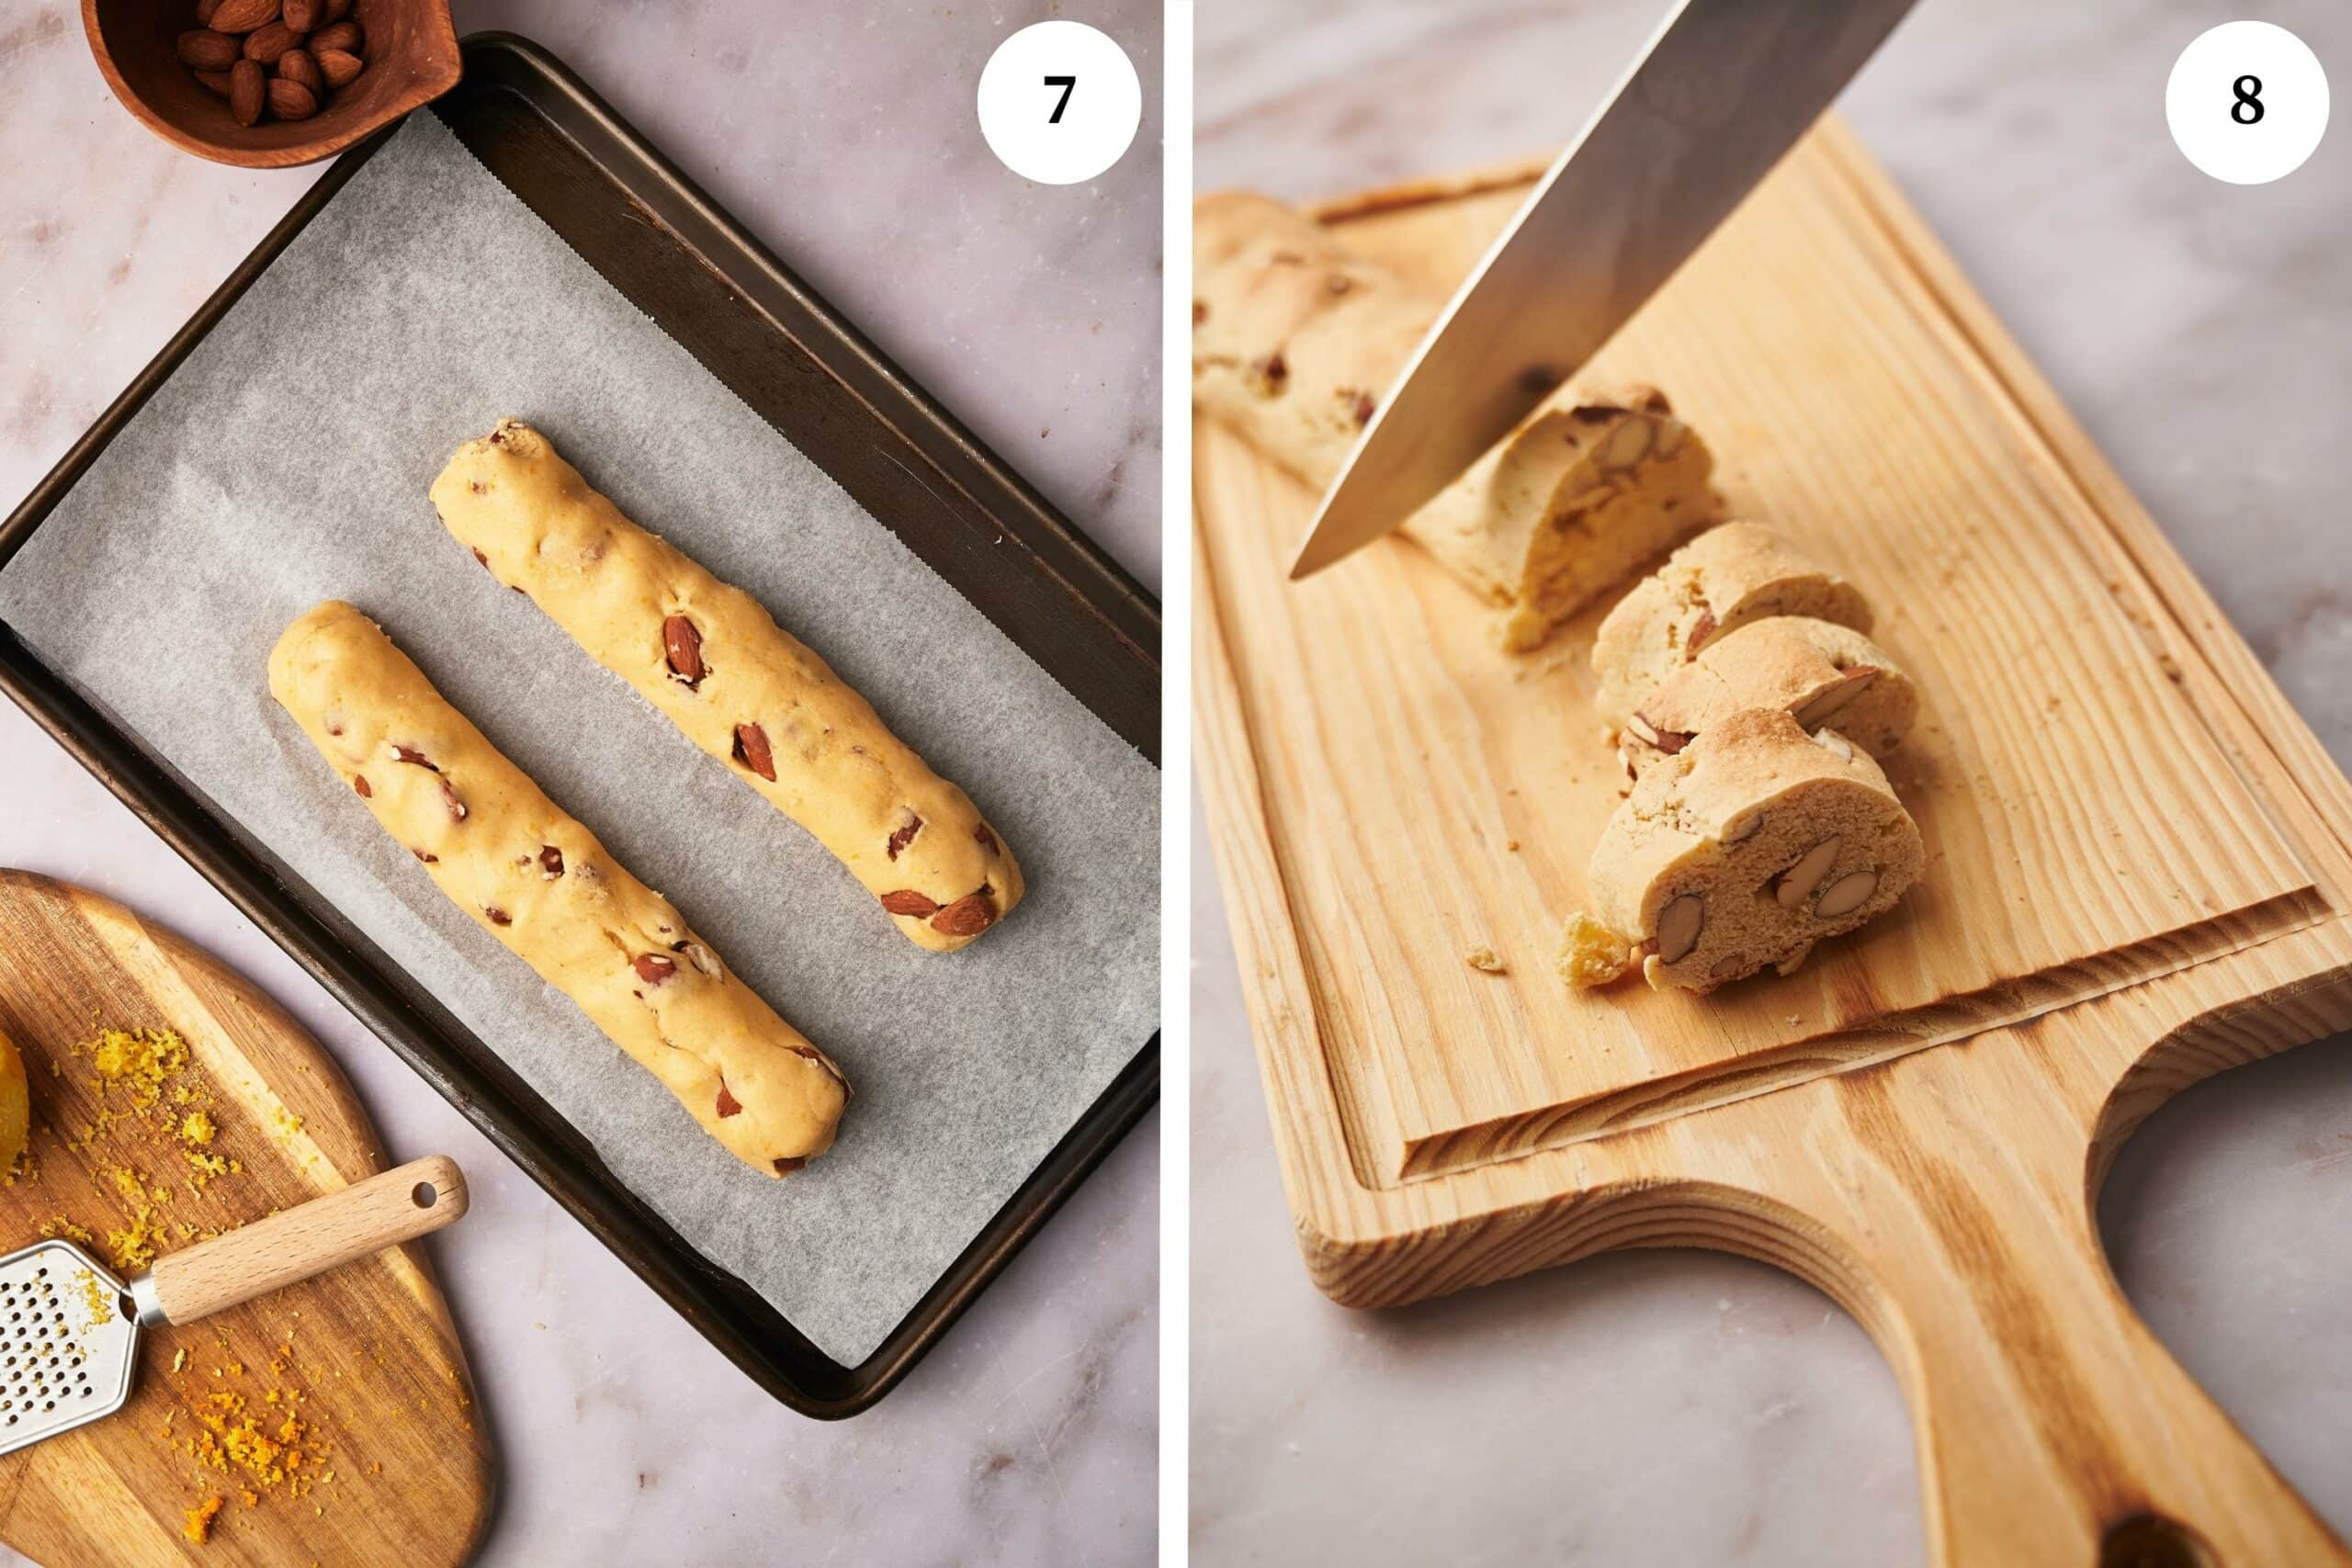 make two logs with the dough, place in the oven and then slices in 1 inch pieces